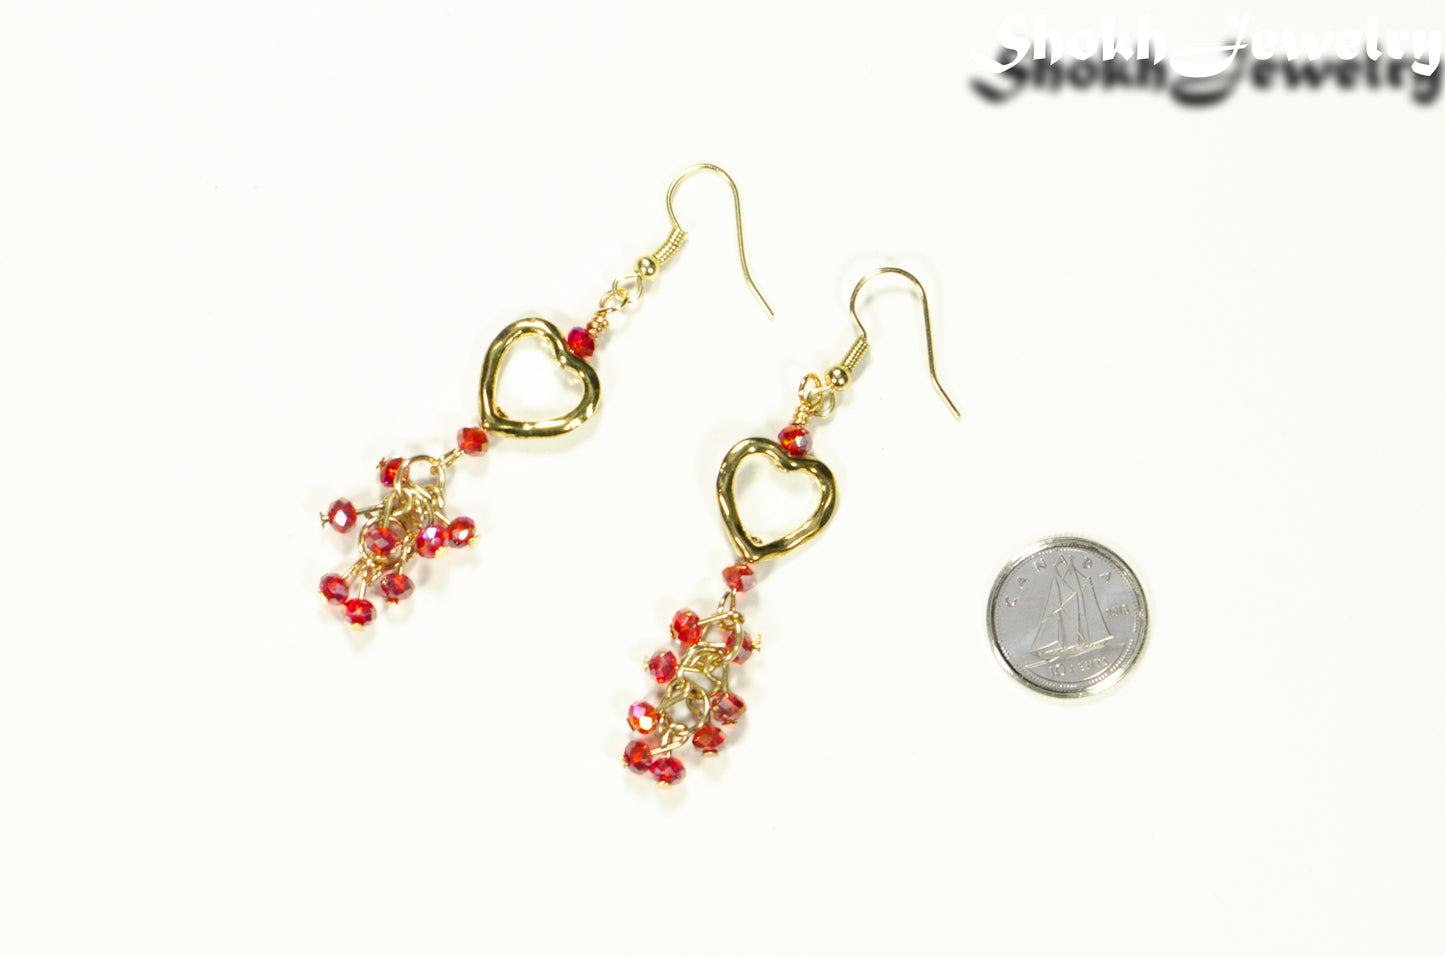 Gold Plated Heart and Red Crystal Cluster Earrings beside a dime.